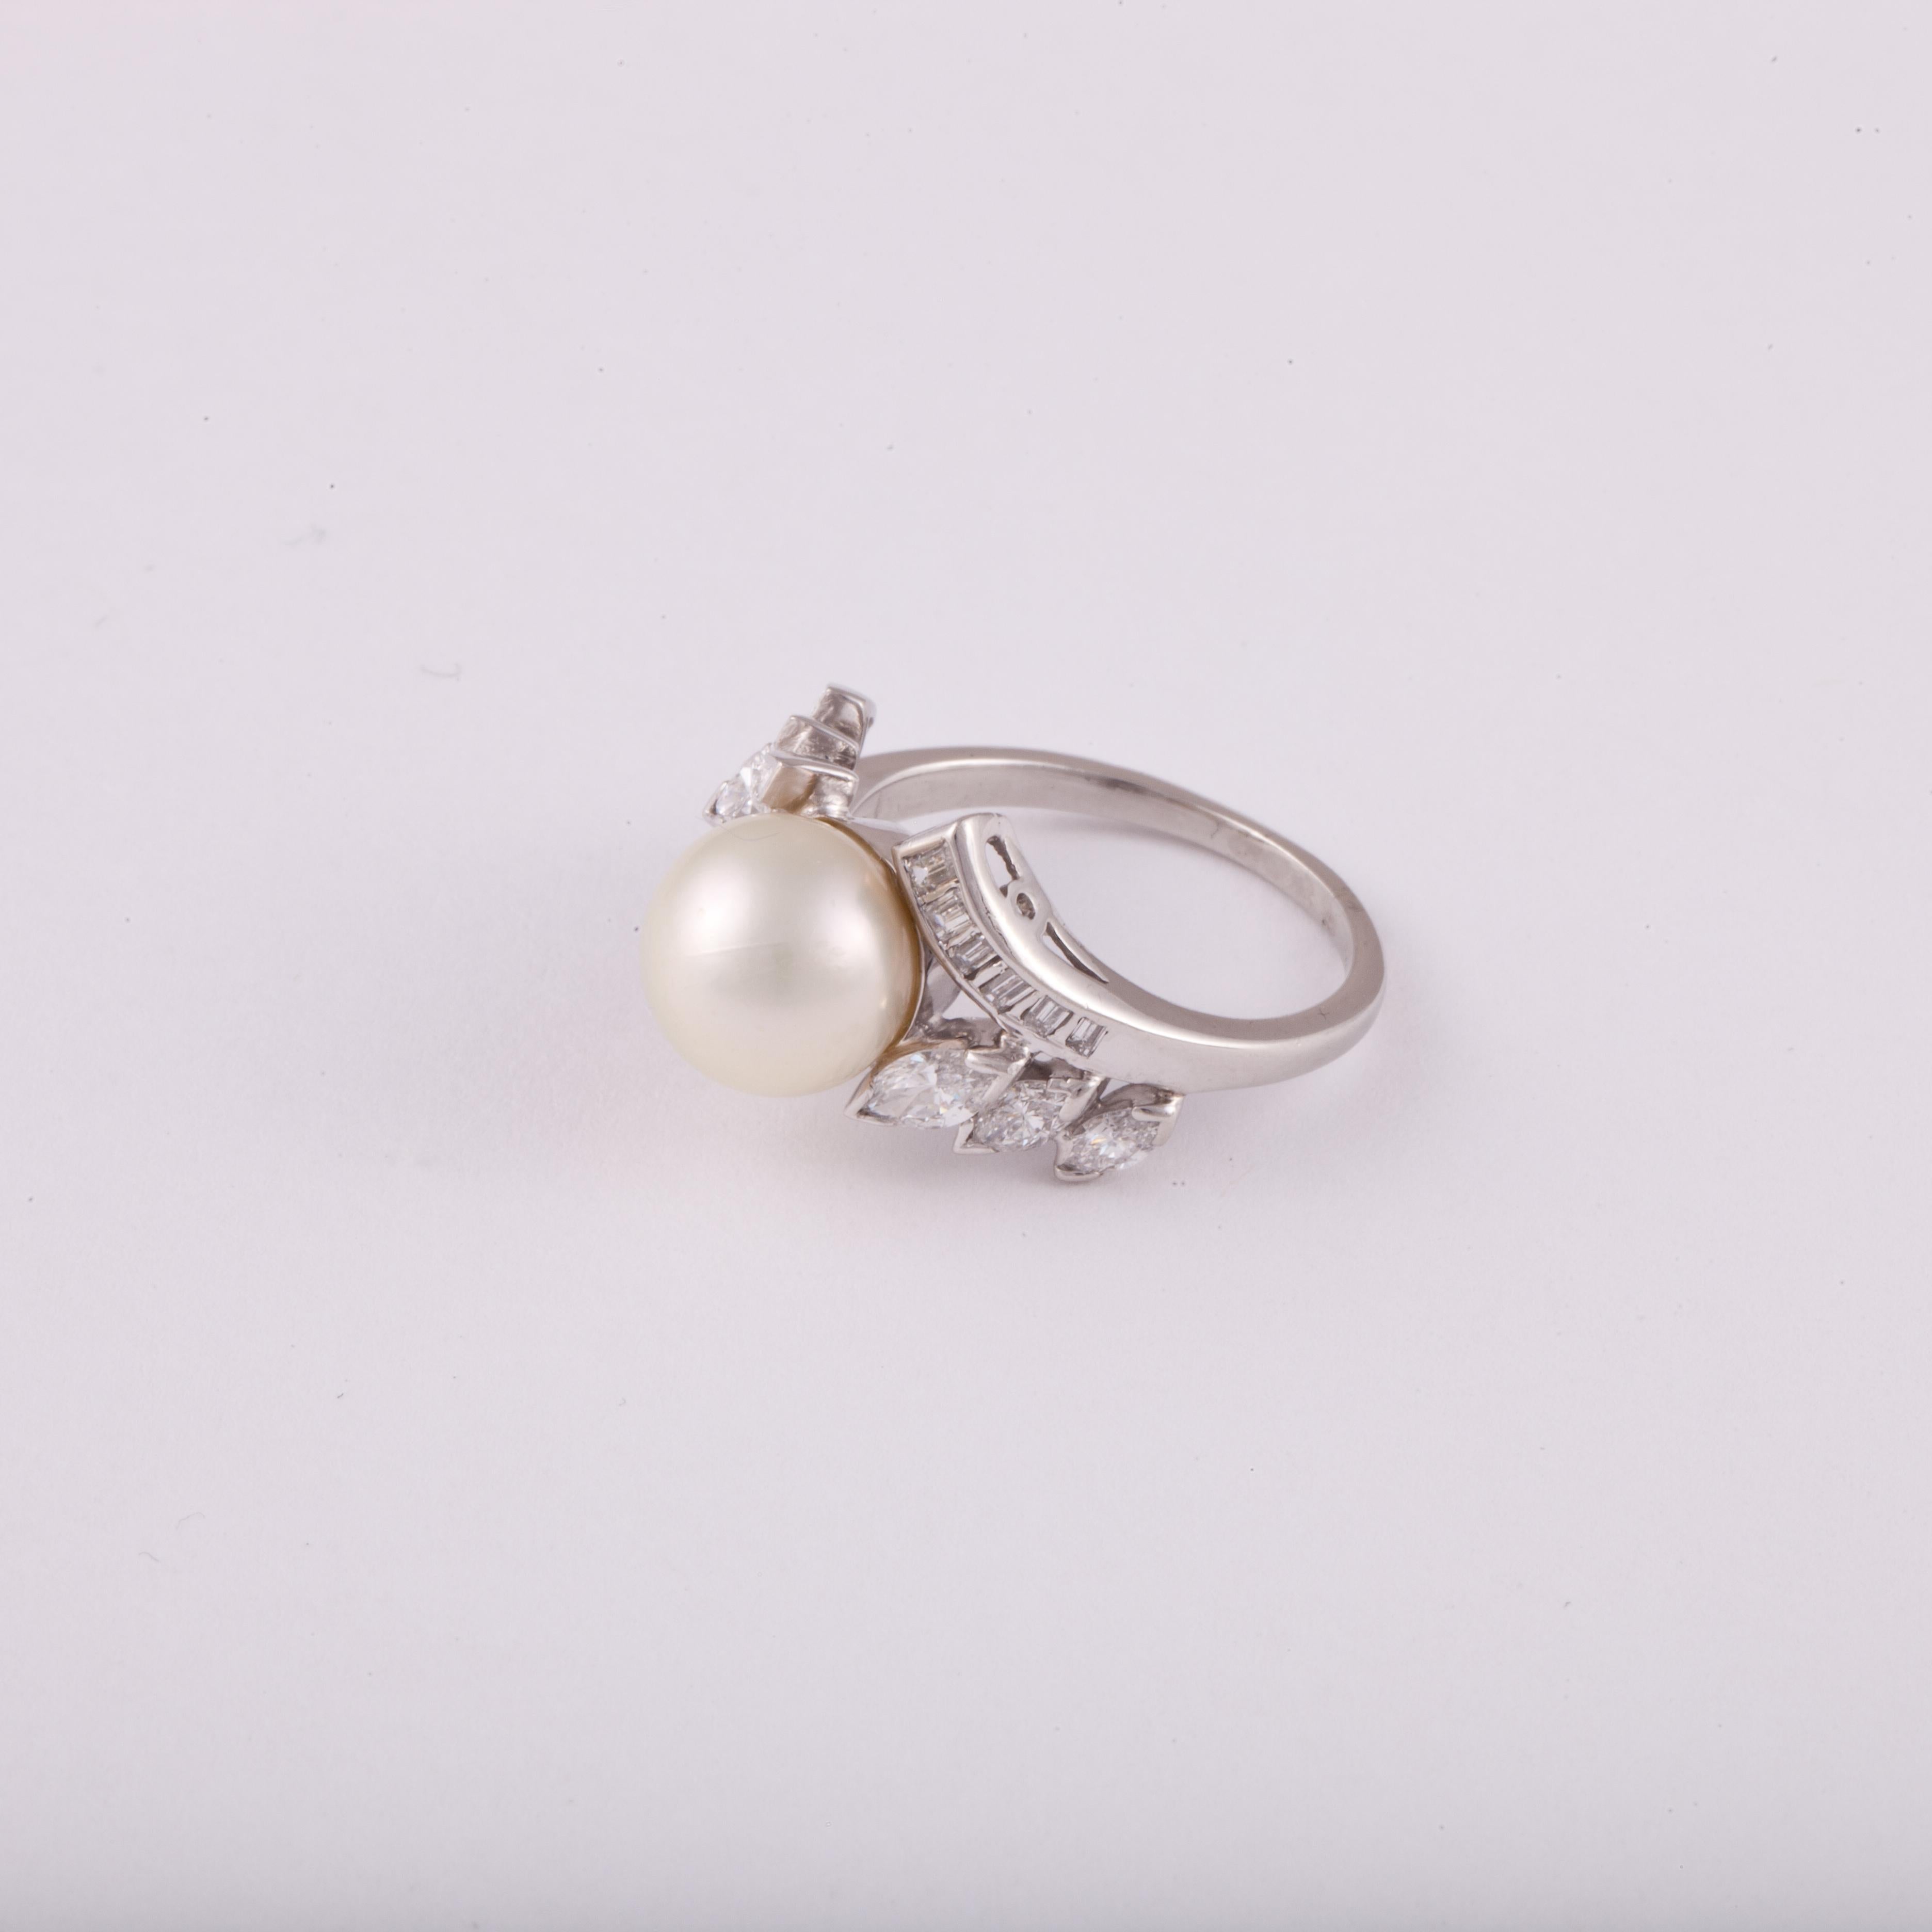 Platinum ring featuring a cultured pearl in the center with marquise and baguette diamonds.  The pearl measures 9.25mm.  The diamonds total 1.05 carats; F-G color and VS clarity.  Presentation area is 3/4 inches by 1/2 inch and stands 3/8 inches off